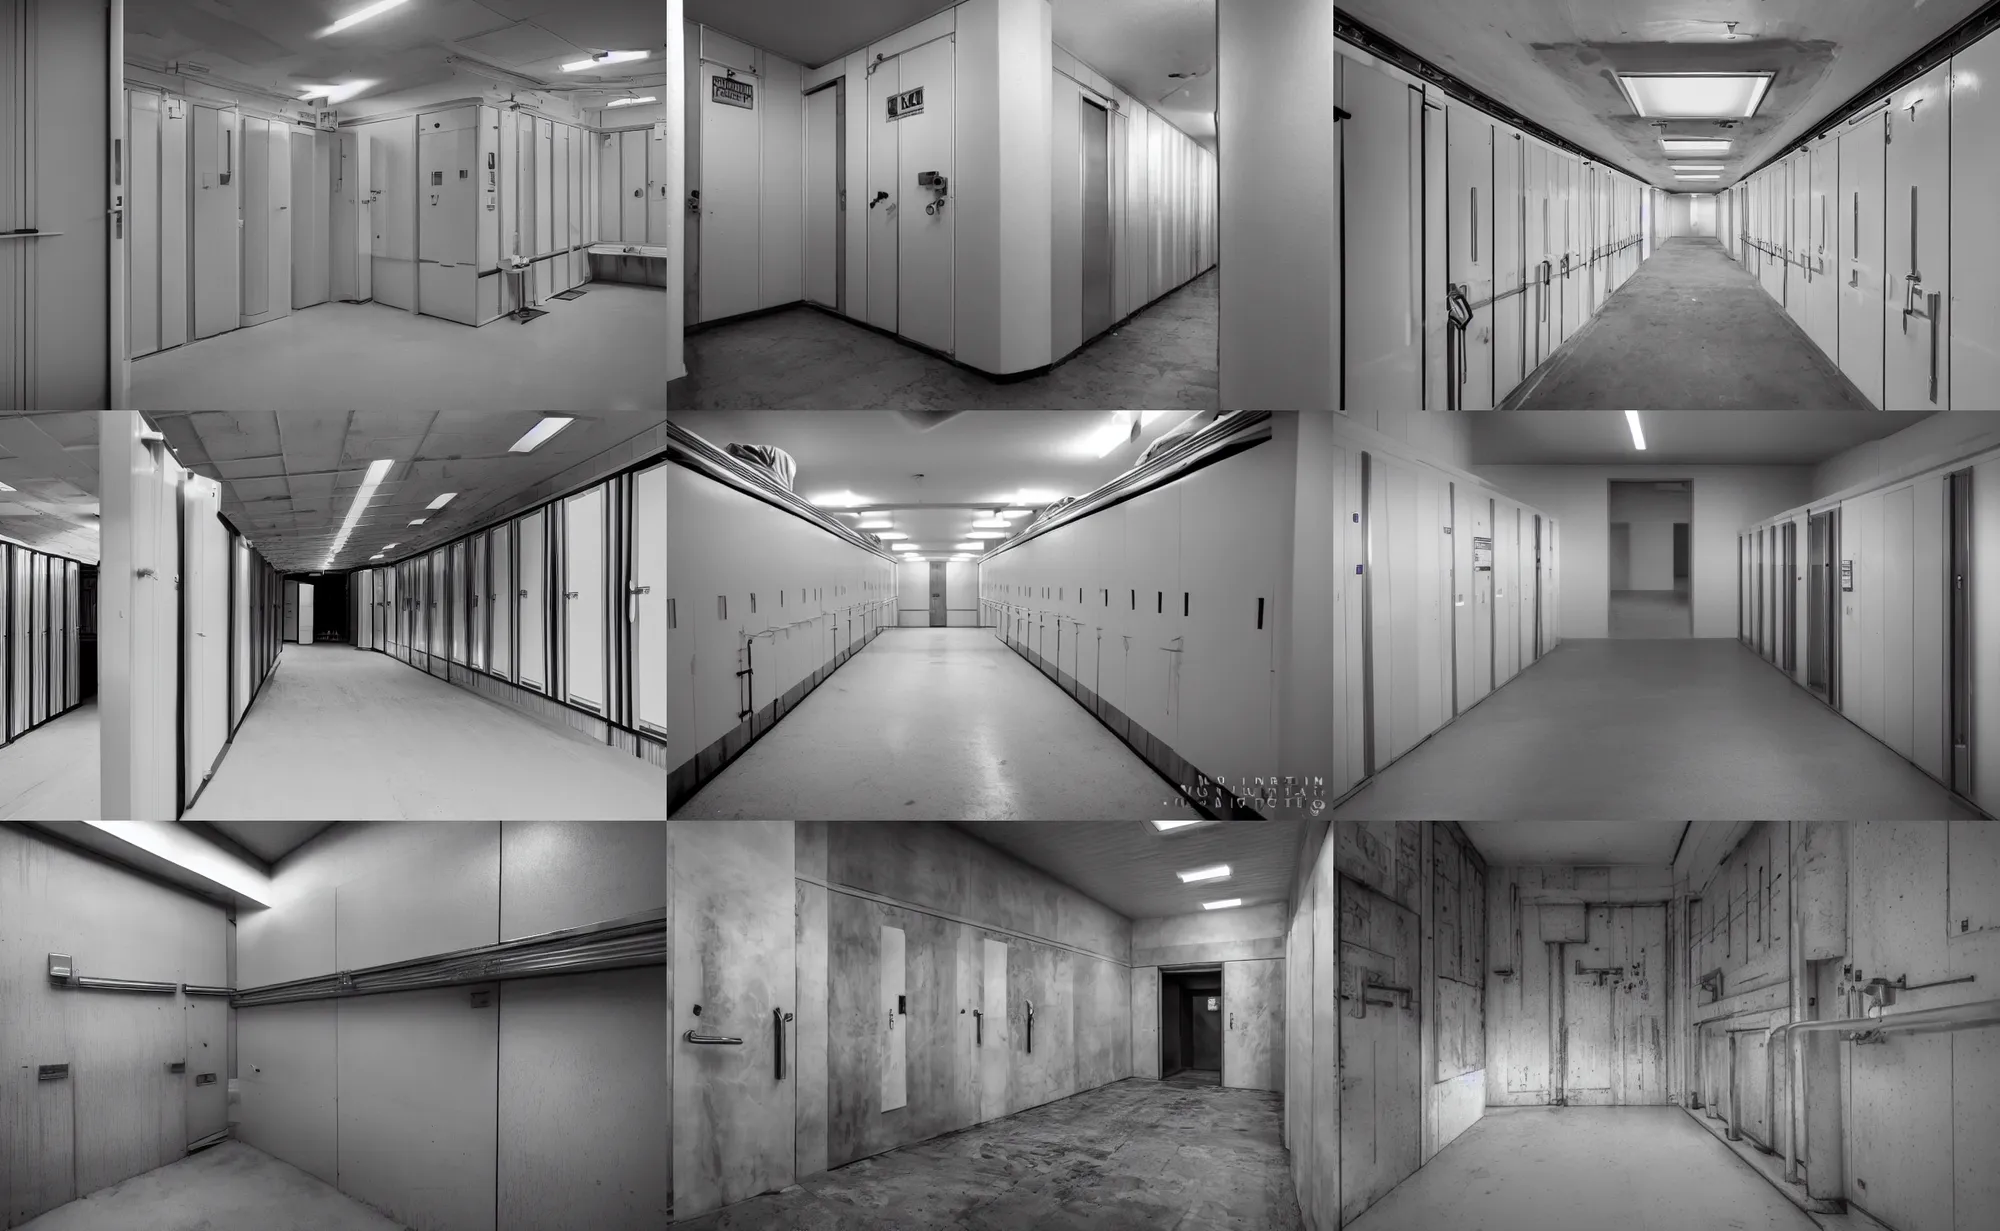 ☁️ THE BEST LEVEL IN THE BACKROOMS? - Found Footage 🔑 #backrooms #dre, Liminal Spaces